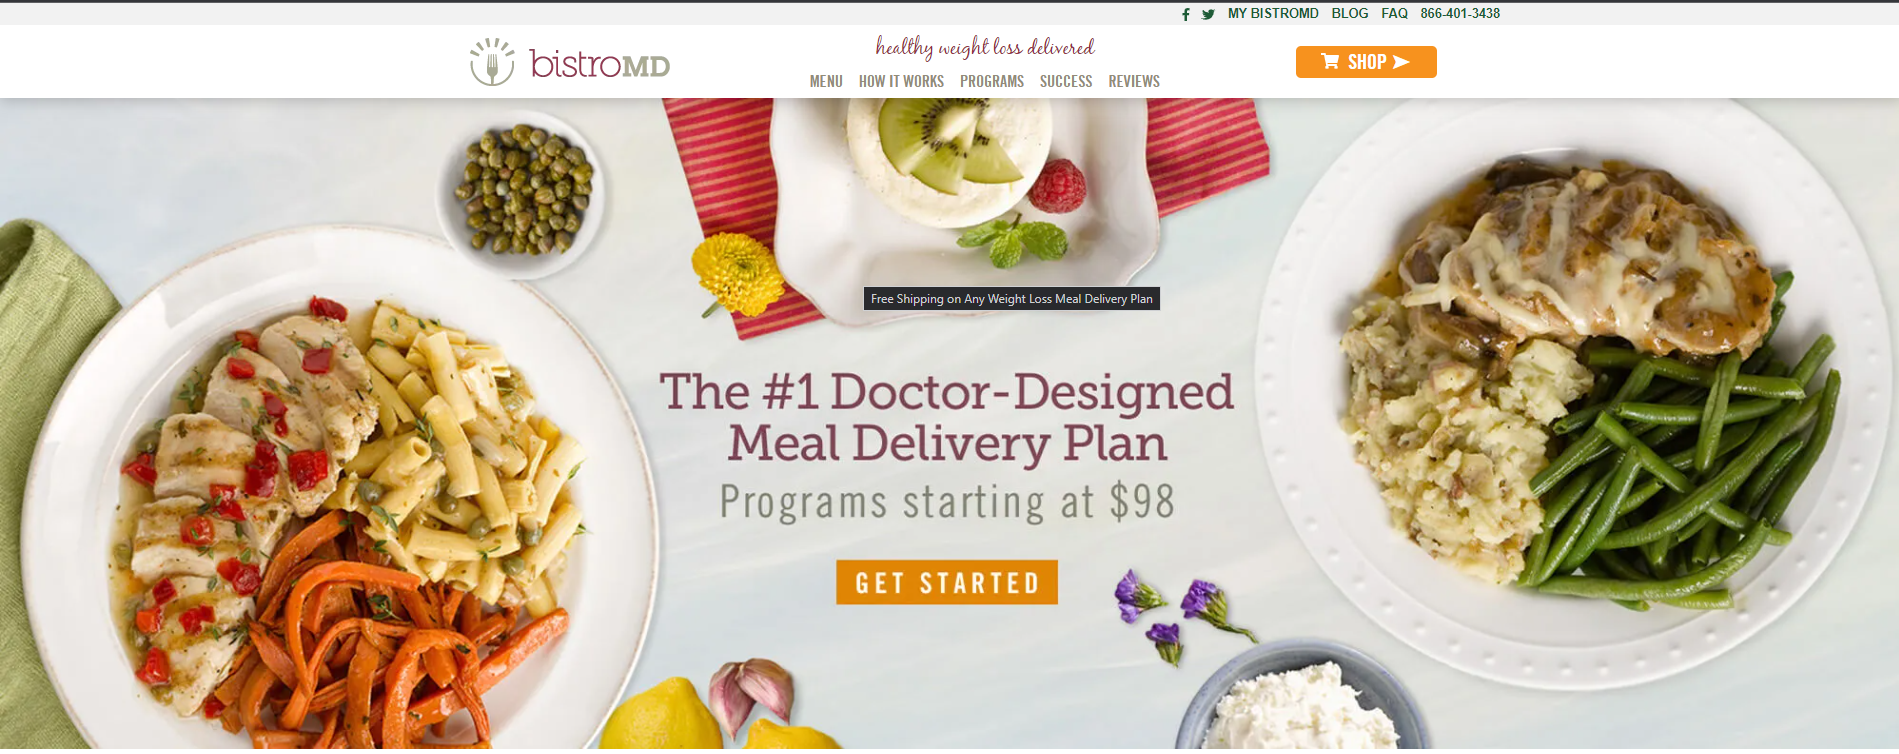 Bistro MD- Best Weight Loss Affiliate Programs